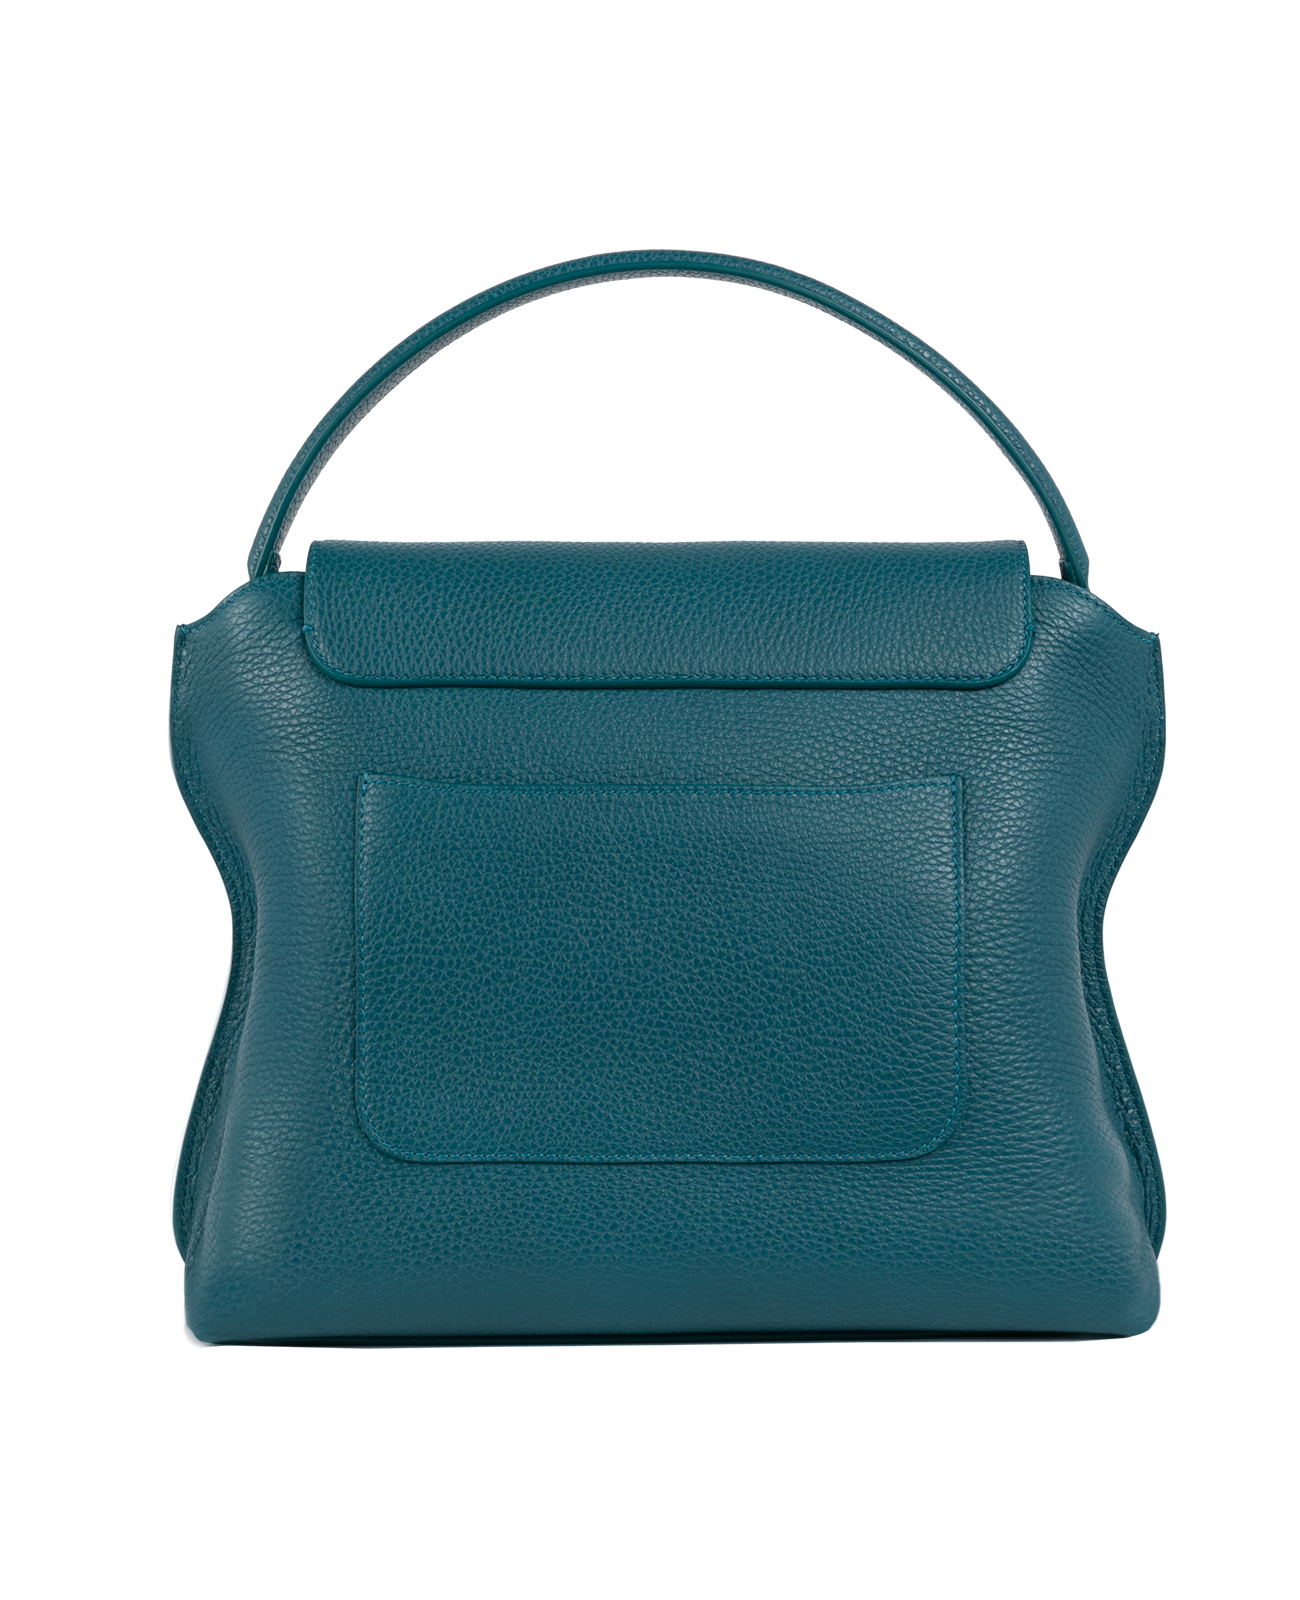 Cross-body bag in Italian full-grain leather, semi-aniline calf Italian leather with detachable shoulder strap.Three compartments, zip pocket in the back compartment. Magnetic flap closure with logo. Color: Teal. Size:Large